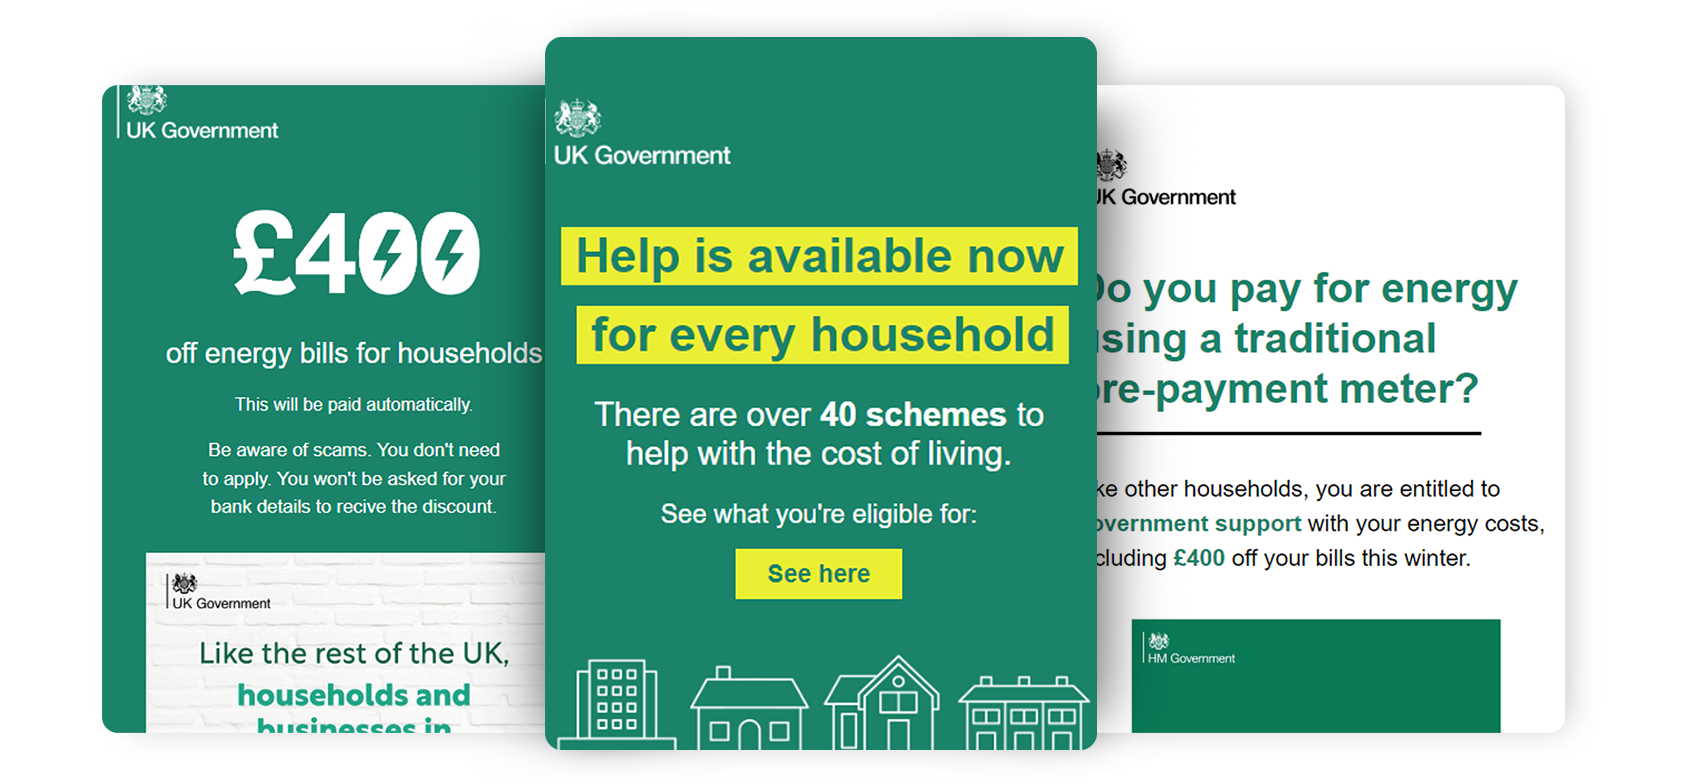 Email Library Campaign: Help for Households